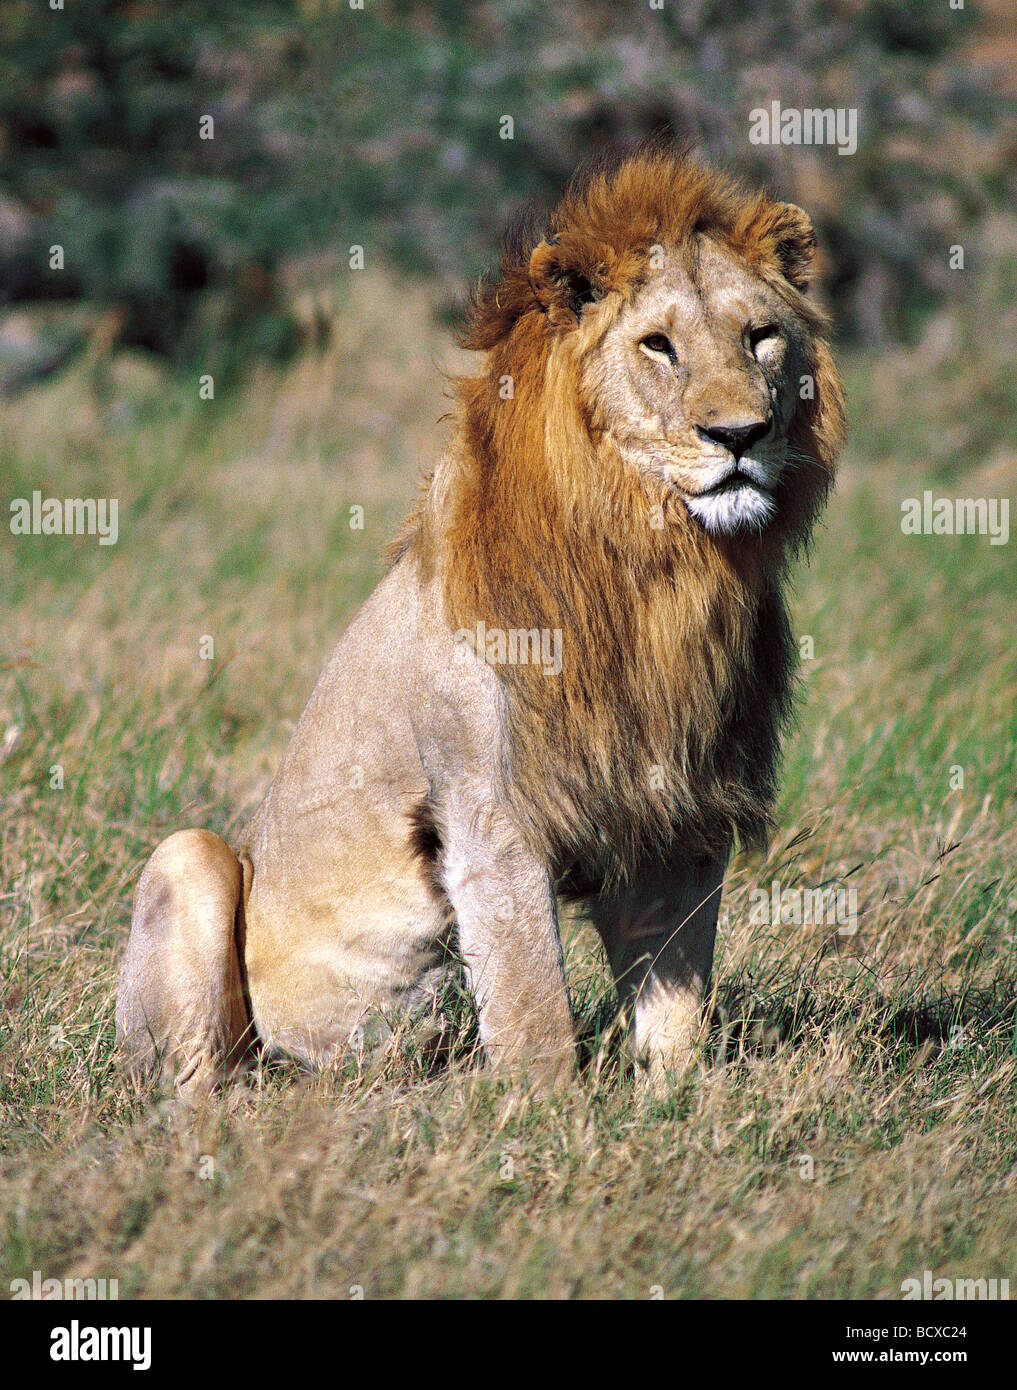 Large alert mature male Lion with fine blond mane sitting with head up looking into distance Serengeti National Park Tanzania Stock Photo